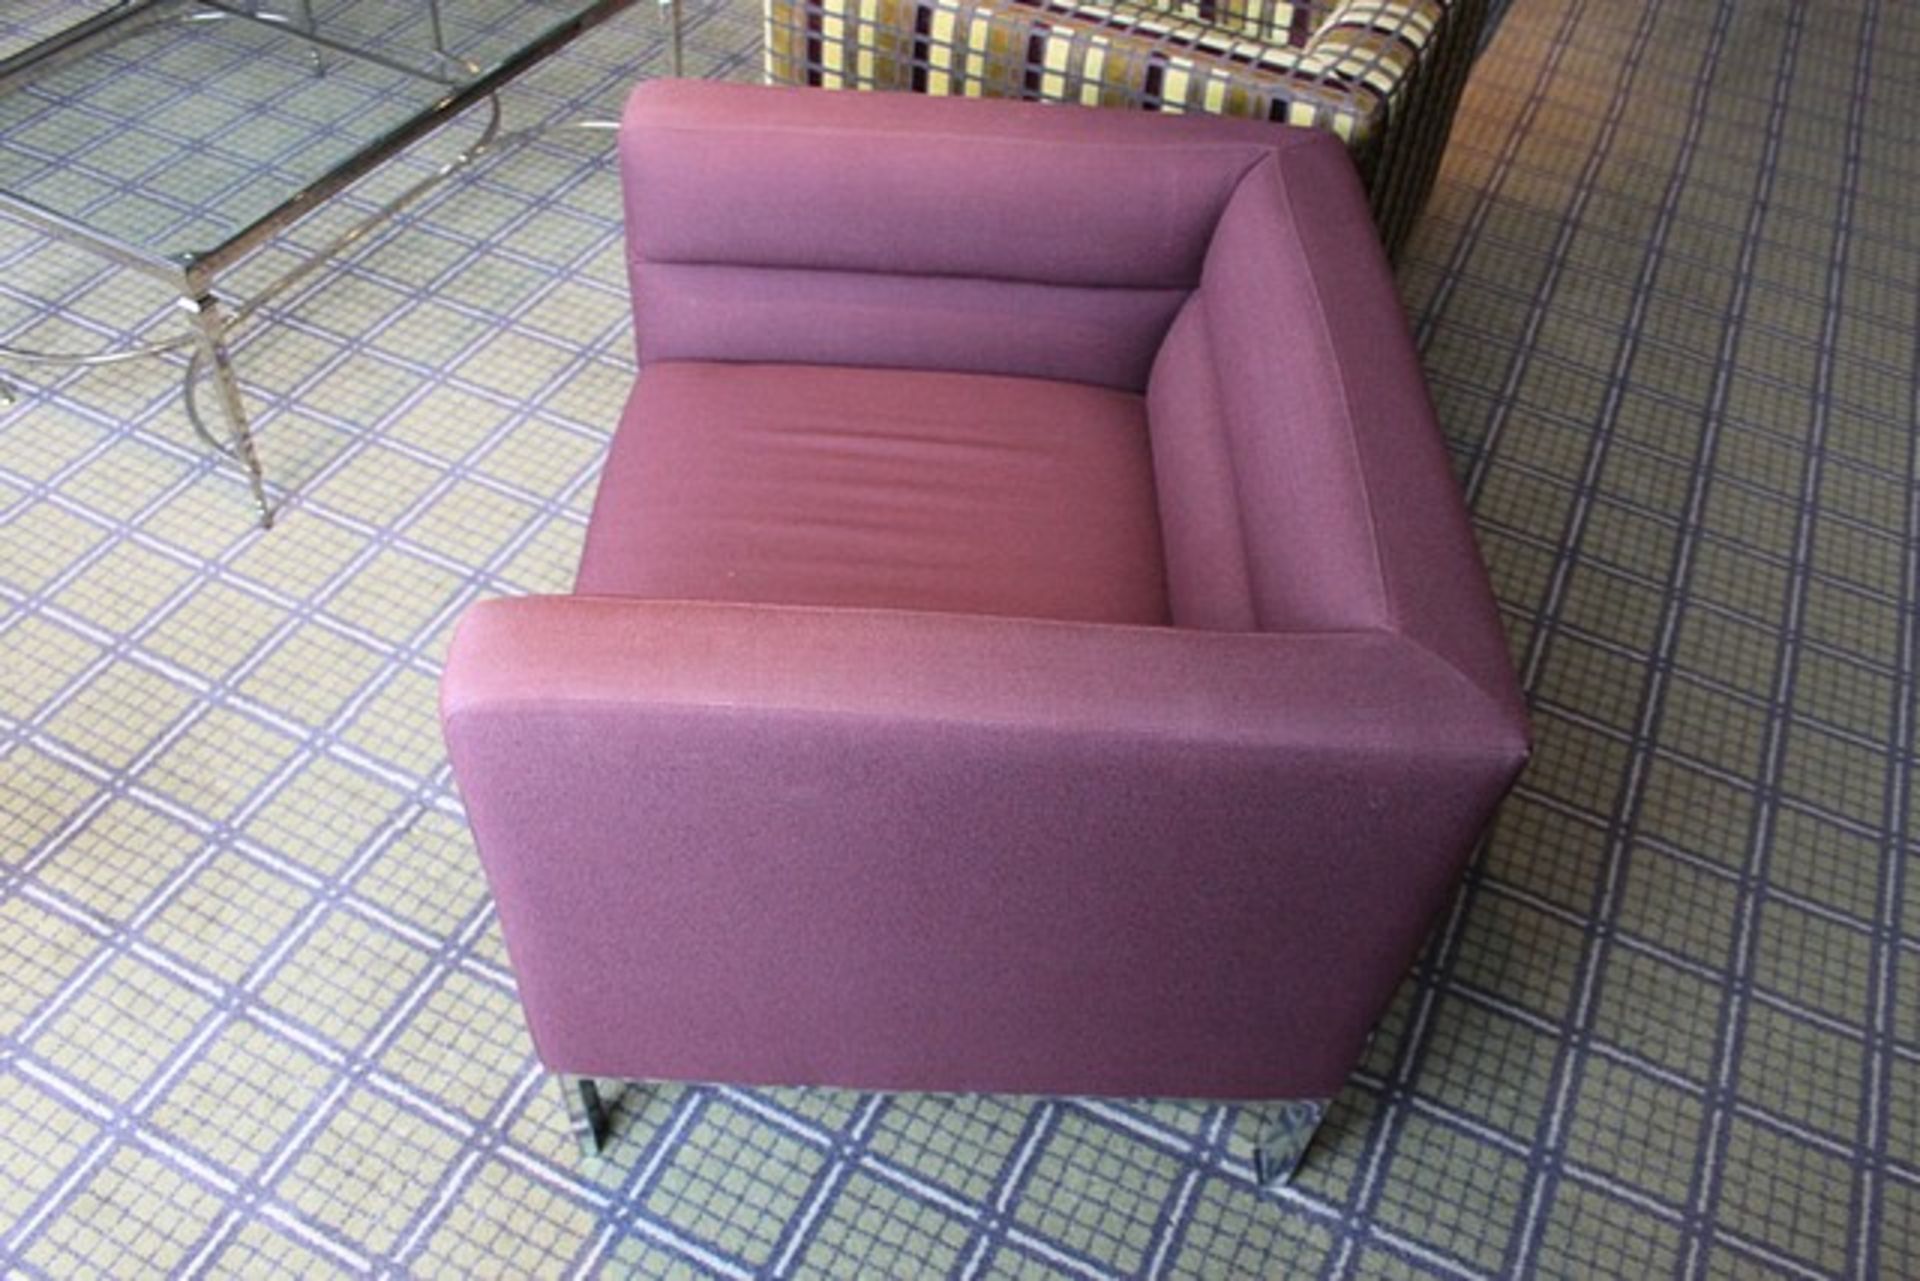 Morgan Furniture Model 361CH Ribb Armchair Chrome Legs Upholstered In Claret 810 X 700 X 700mm - Image 3 of 5